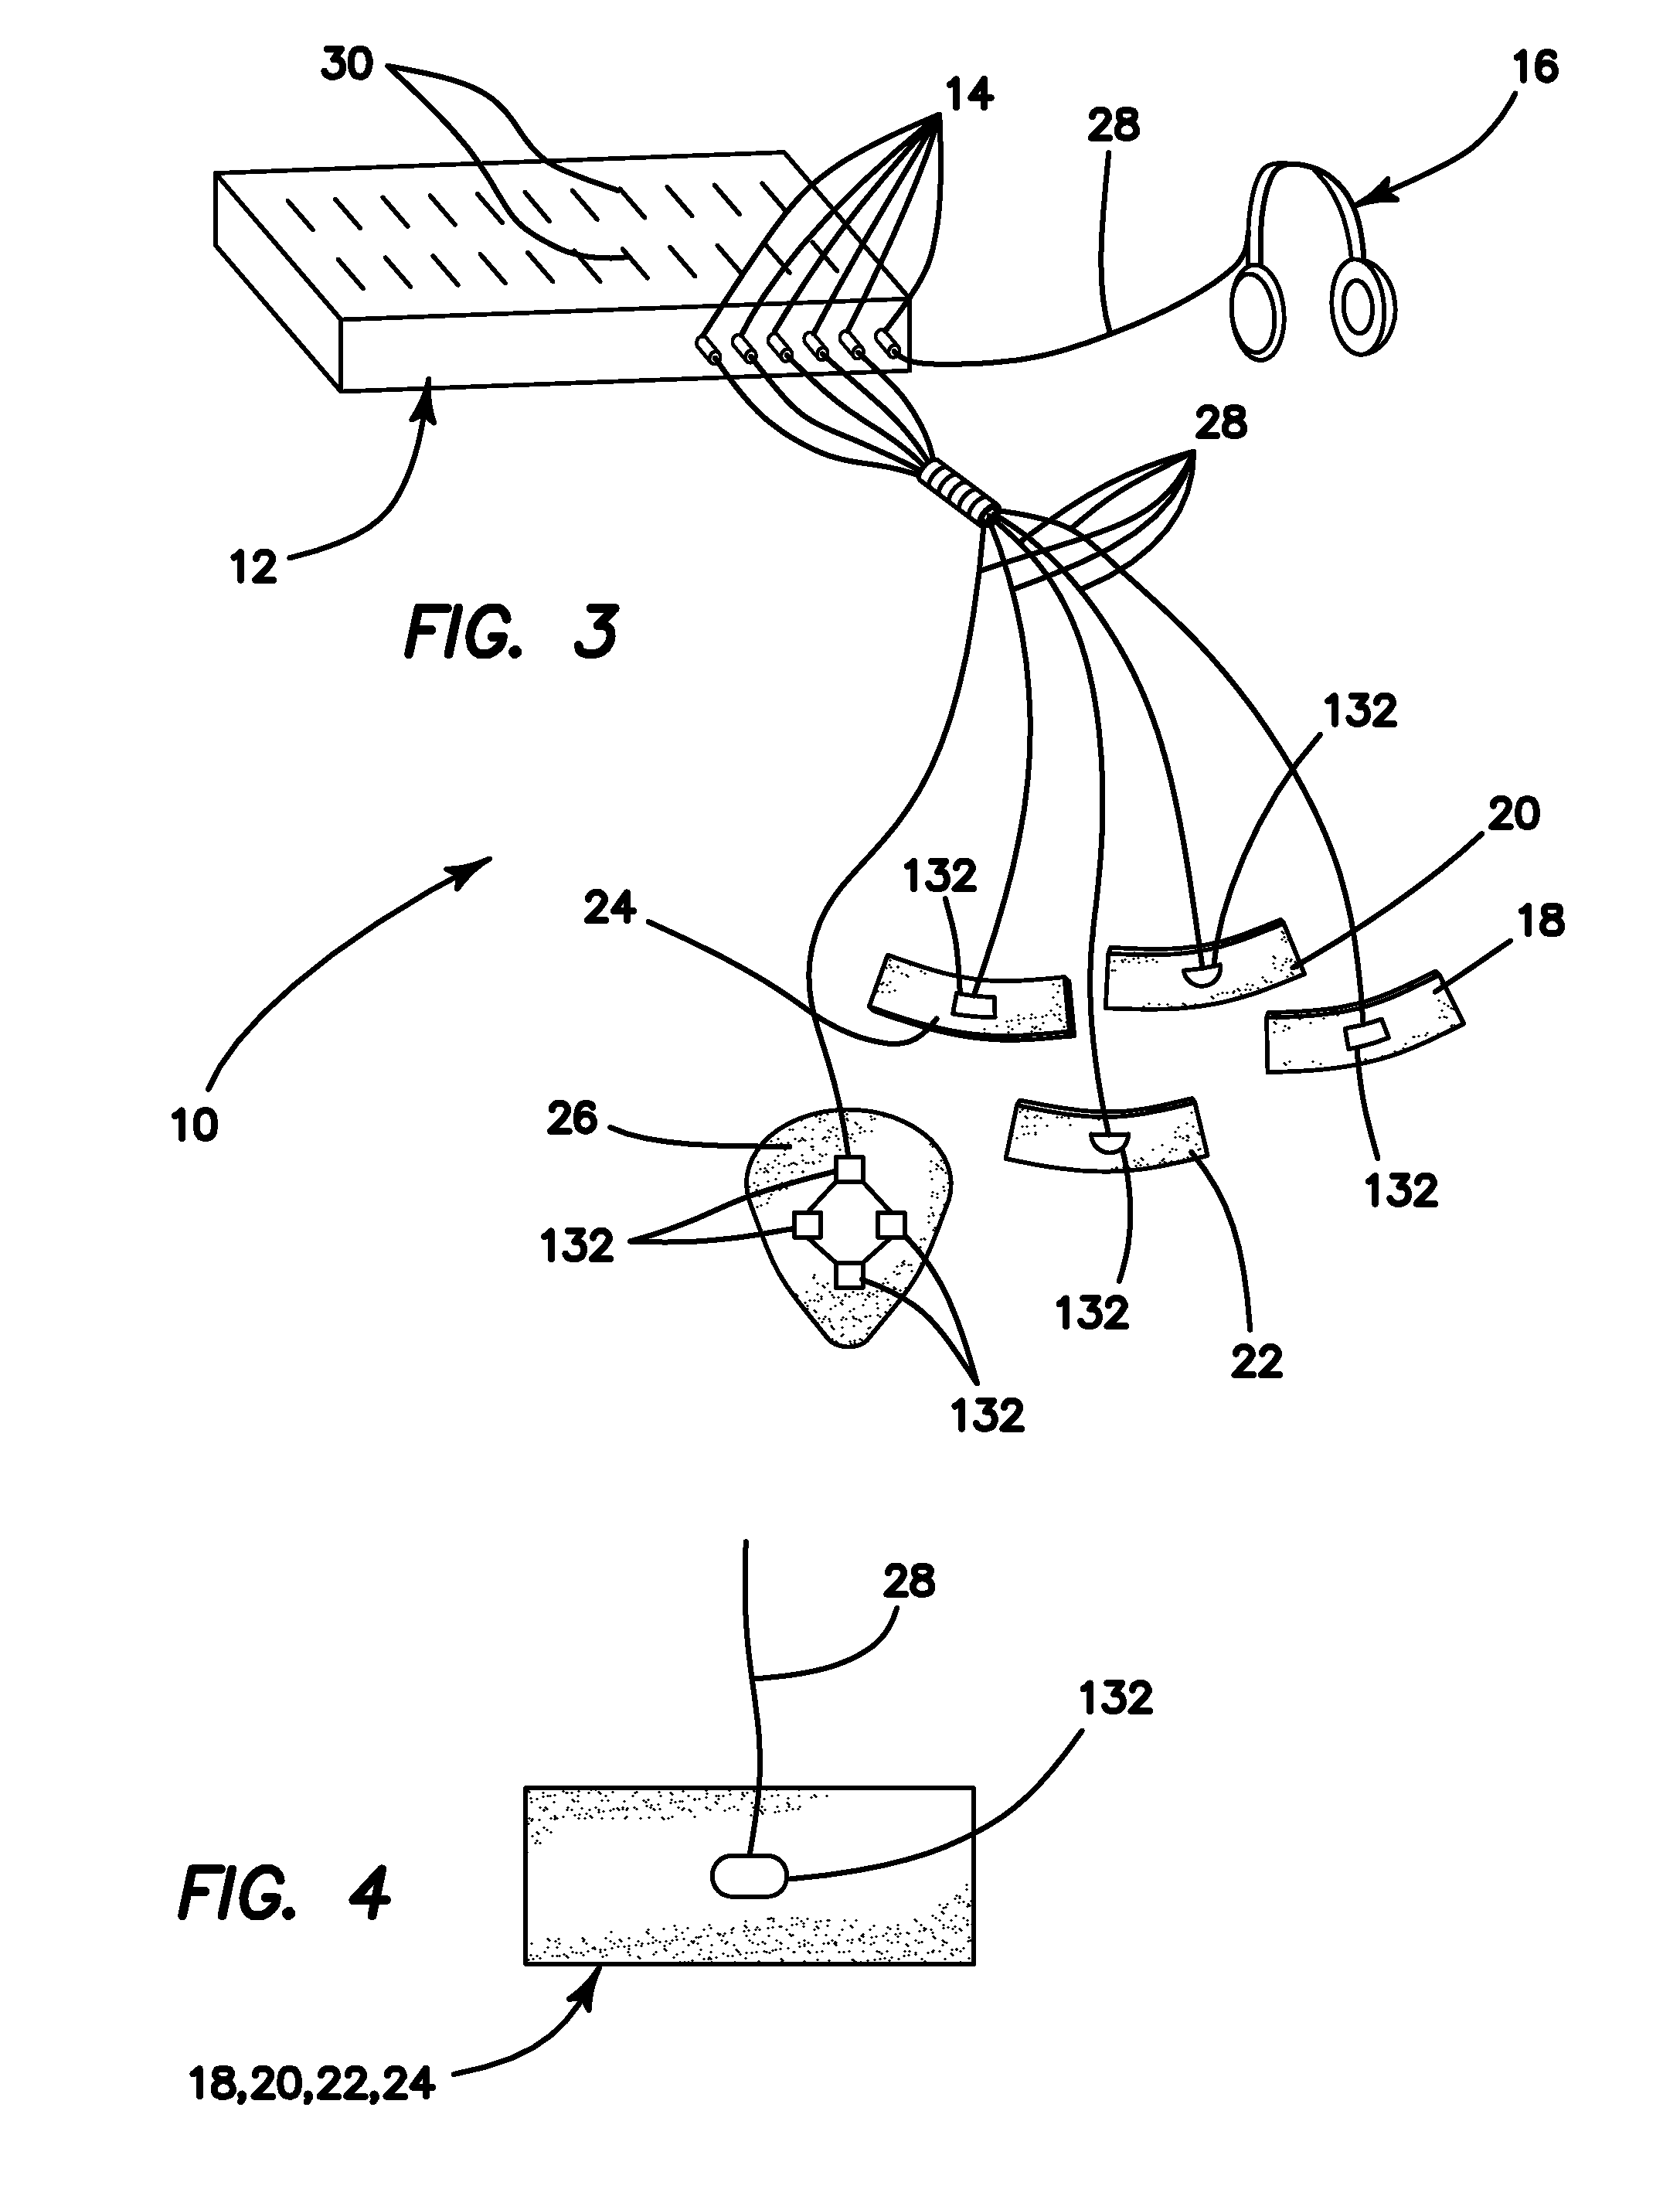 Sound therapy systems and methods for recalibrating the body's electromagnetic field